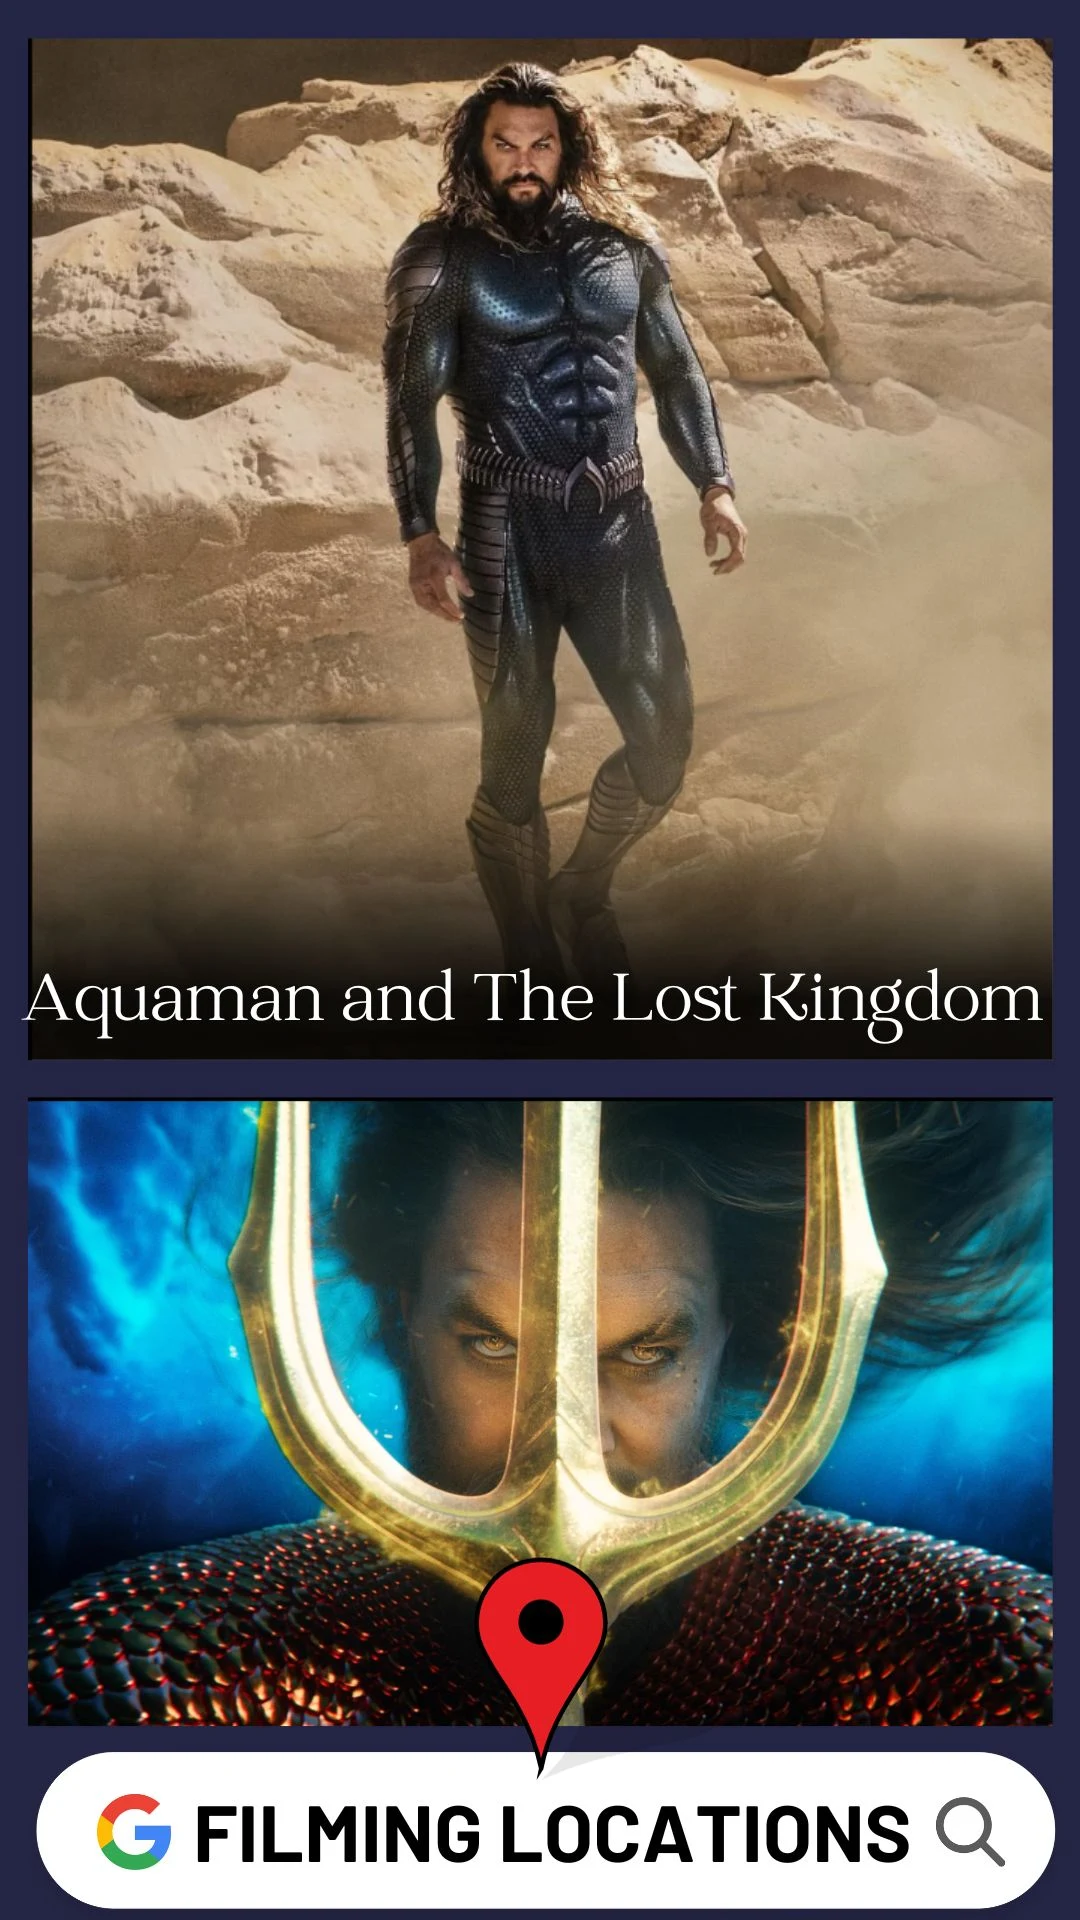 Aquaman and The Lost Kingdom Filming Locations Filming Locations